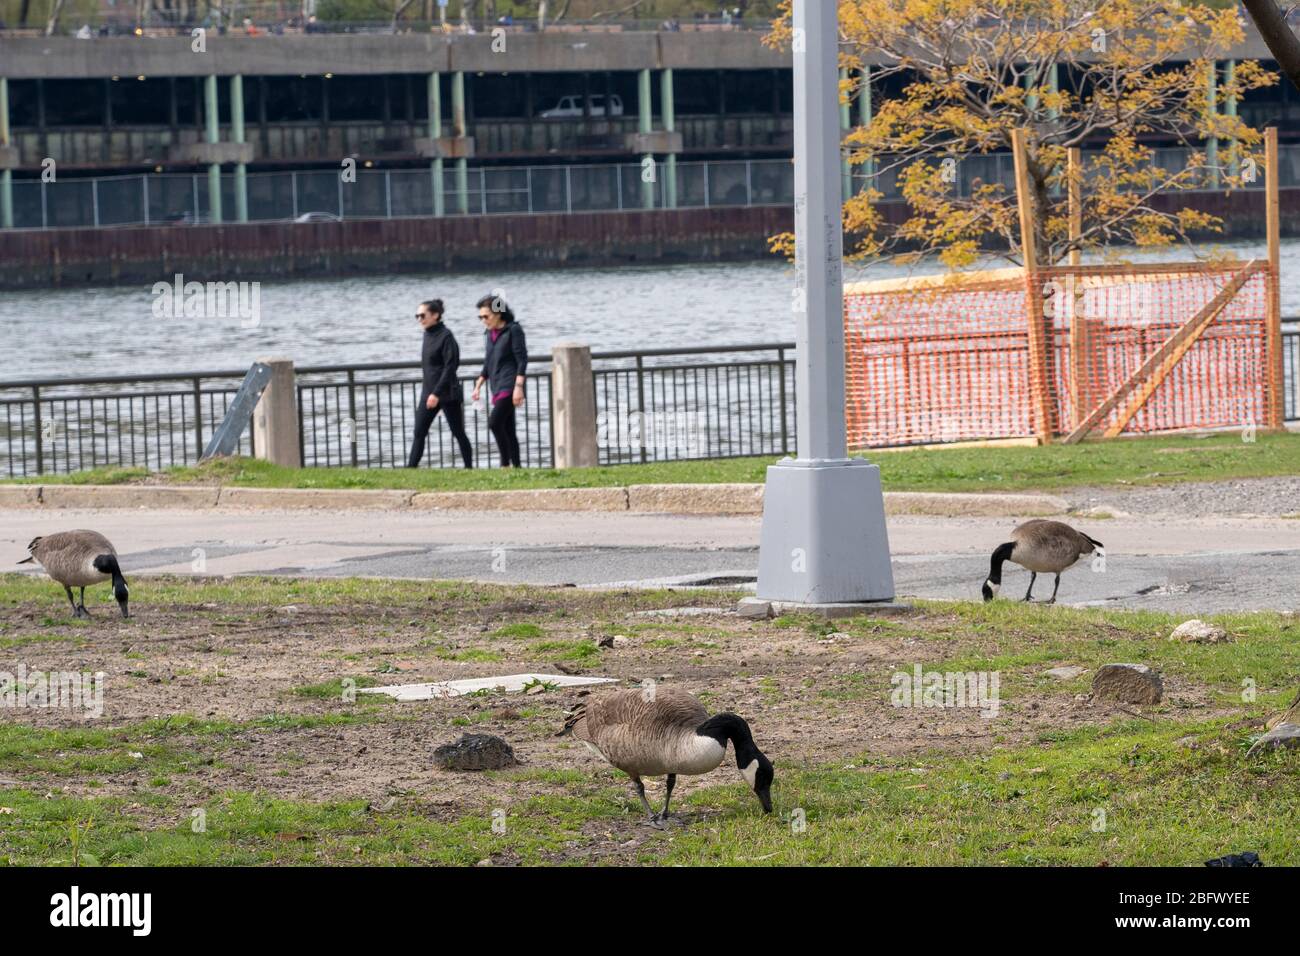 New York, United States. 19th Apr, 2020. Canadian geese seen outside the Coler Hospital campus at Roosevelt Island amid the coronavirus (covid-19) pandemic in New York City.Coler Hospital, which was closed in 2018, is being looked at by New York City as a location to expand hospital facilities to treat coronavirus patients. Credit: SOPA Images Limited/Alamy Live News Stock Photo